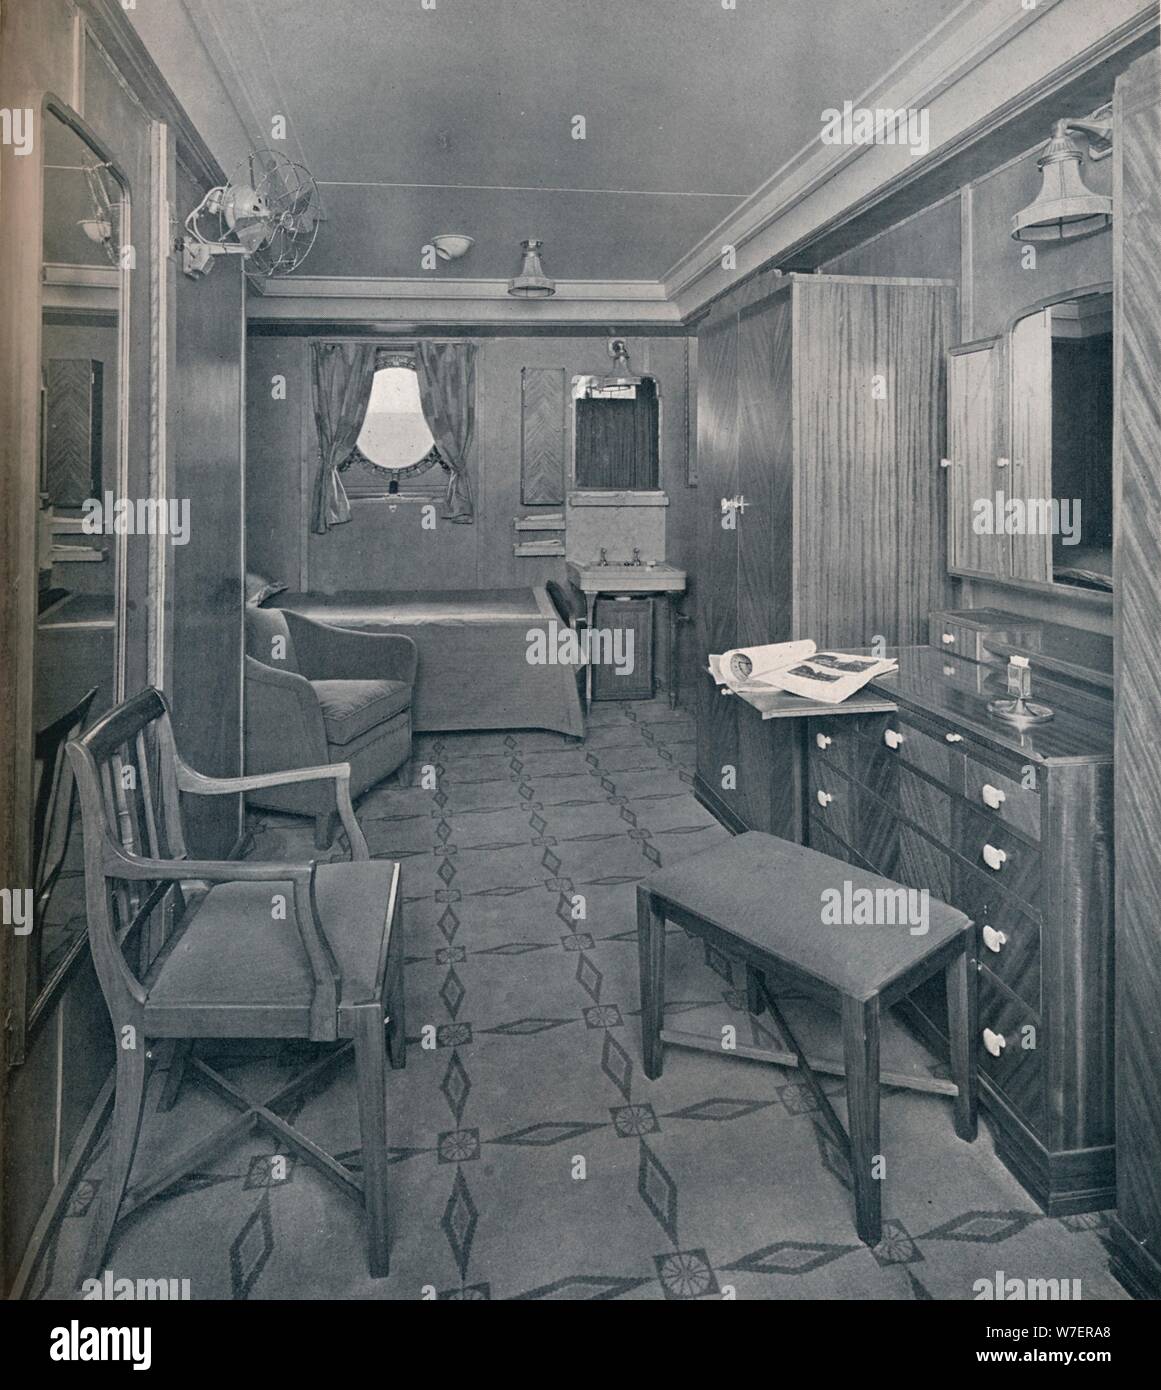 'Apartments in the First Class area on board the  S.S. Empress of Britain', 1931. Artist: Stewart Bale Limited. Stock Photo